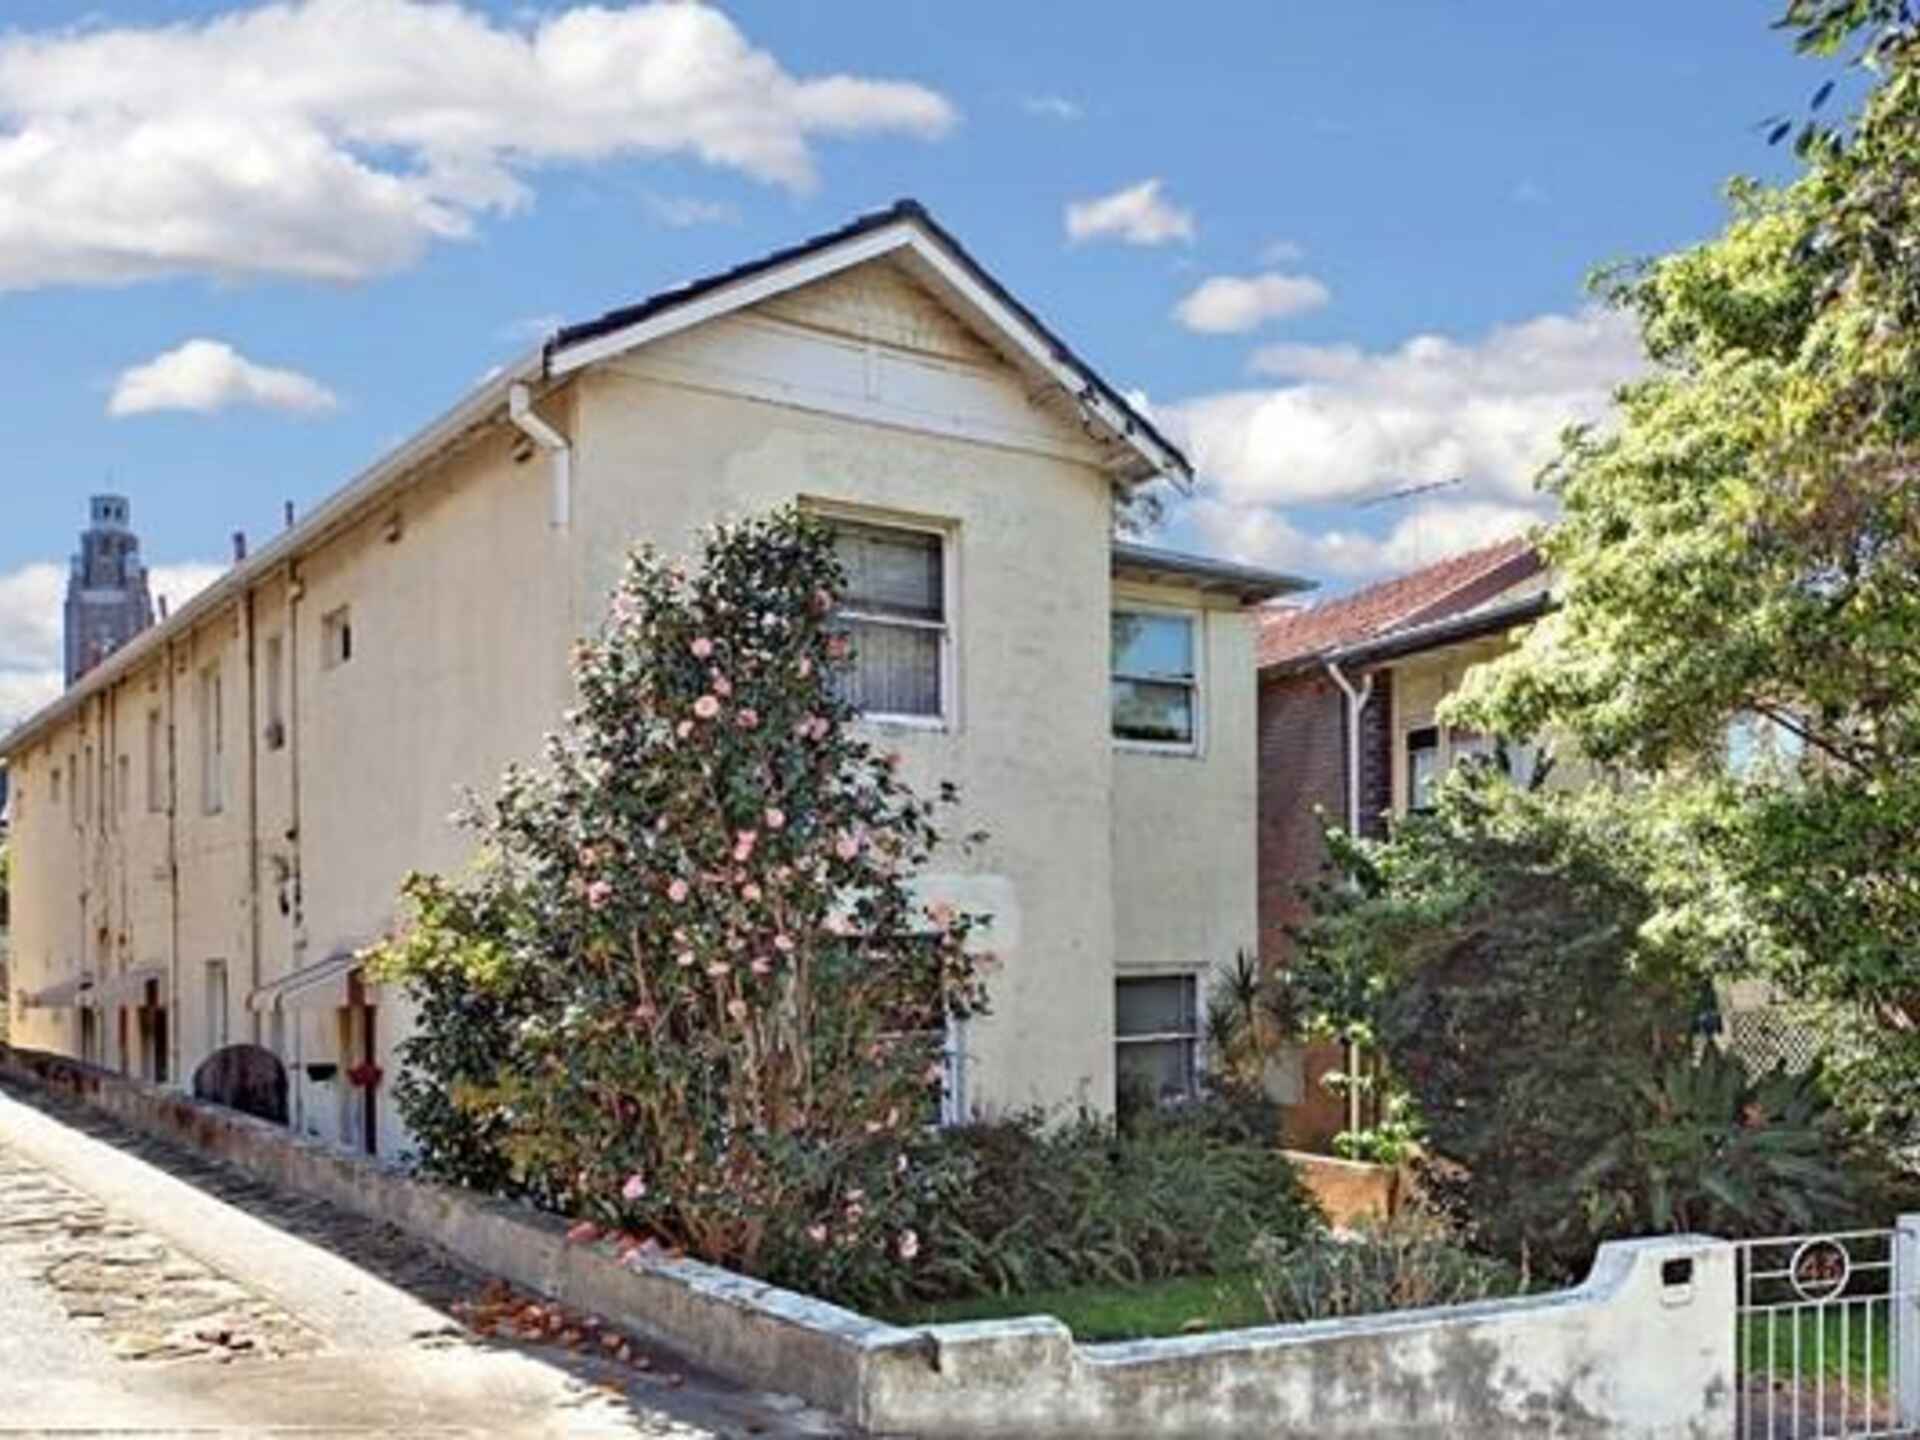 43 Dudley Street Coogee